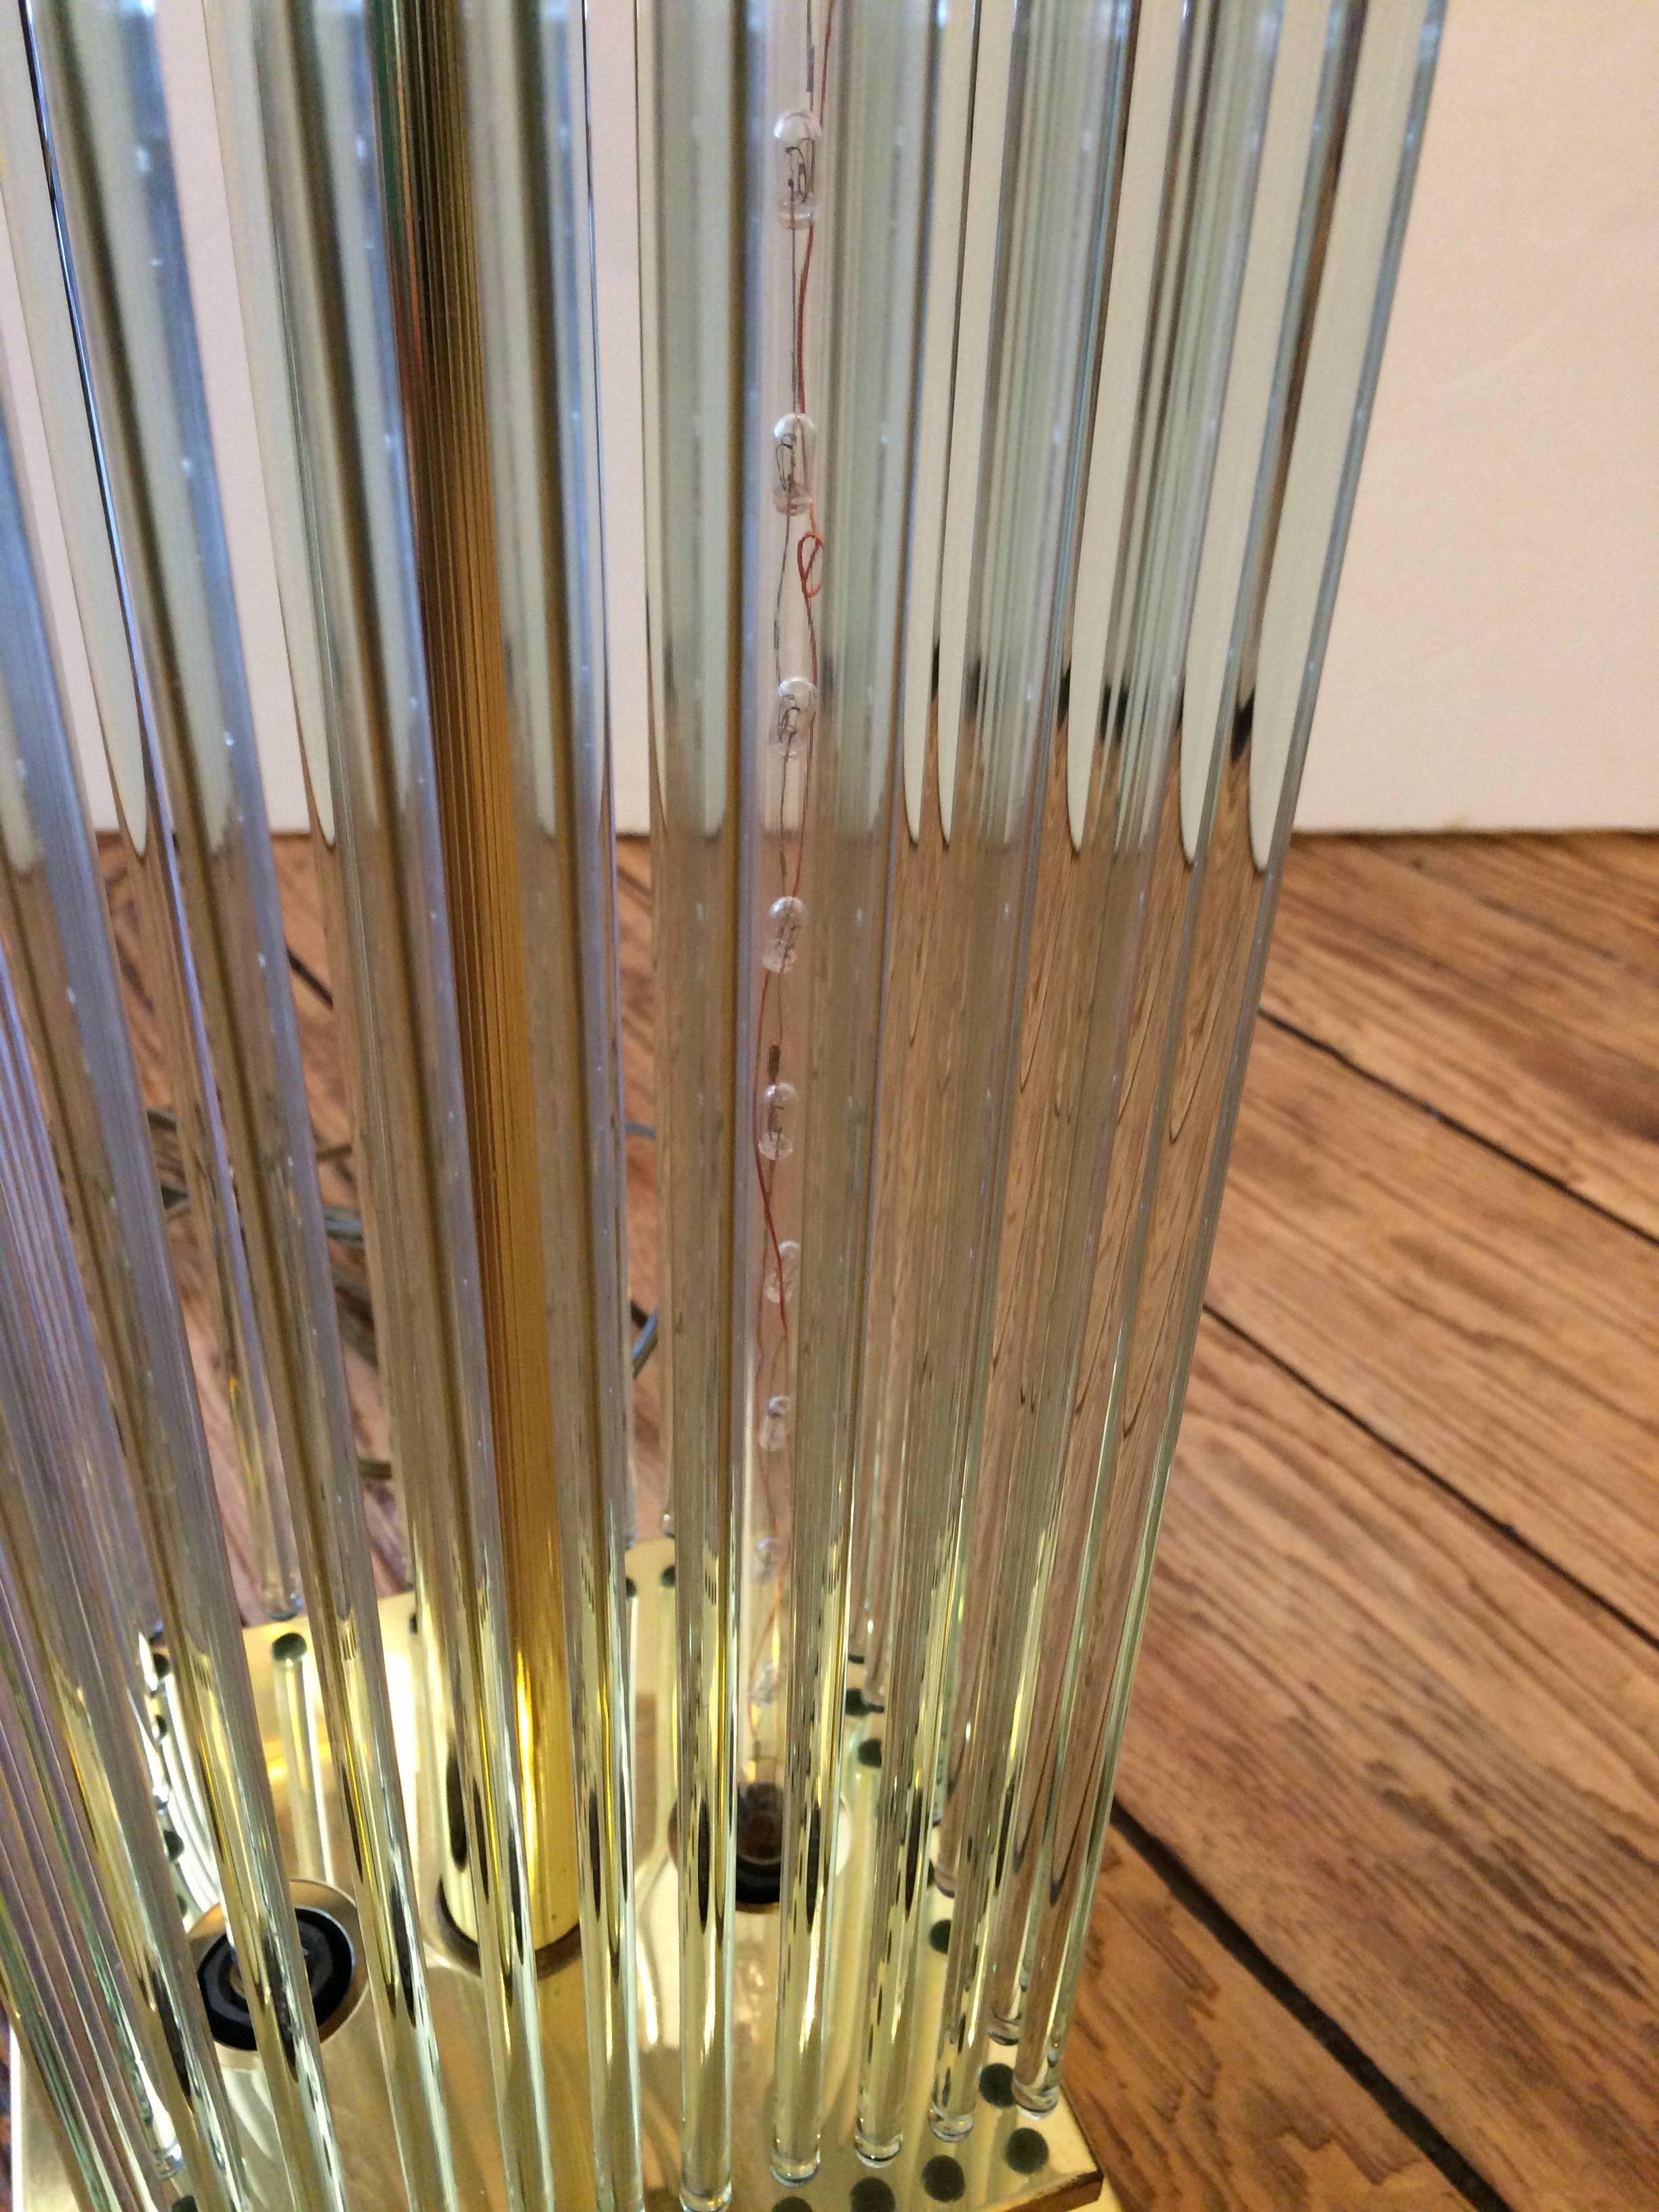 Out of the ordinary glitzy Mid-Century Modern lamp having a cool base with a collection of hanging narrow glass rods. Lights up in two places, inside and on top.
Base is 7 x 7.